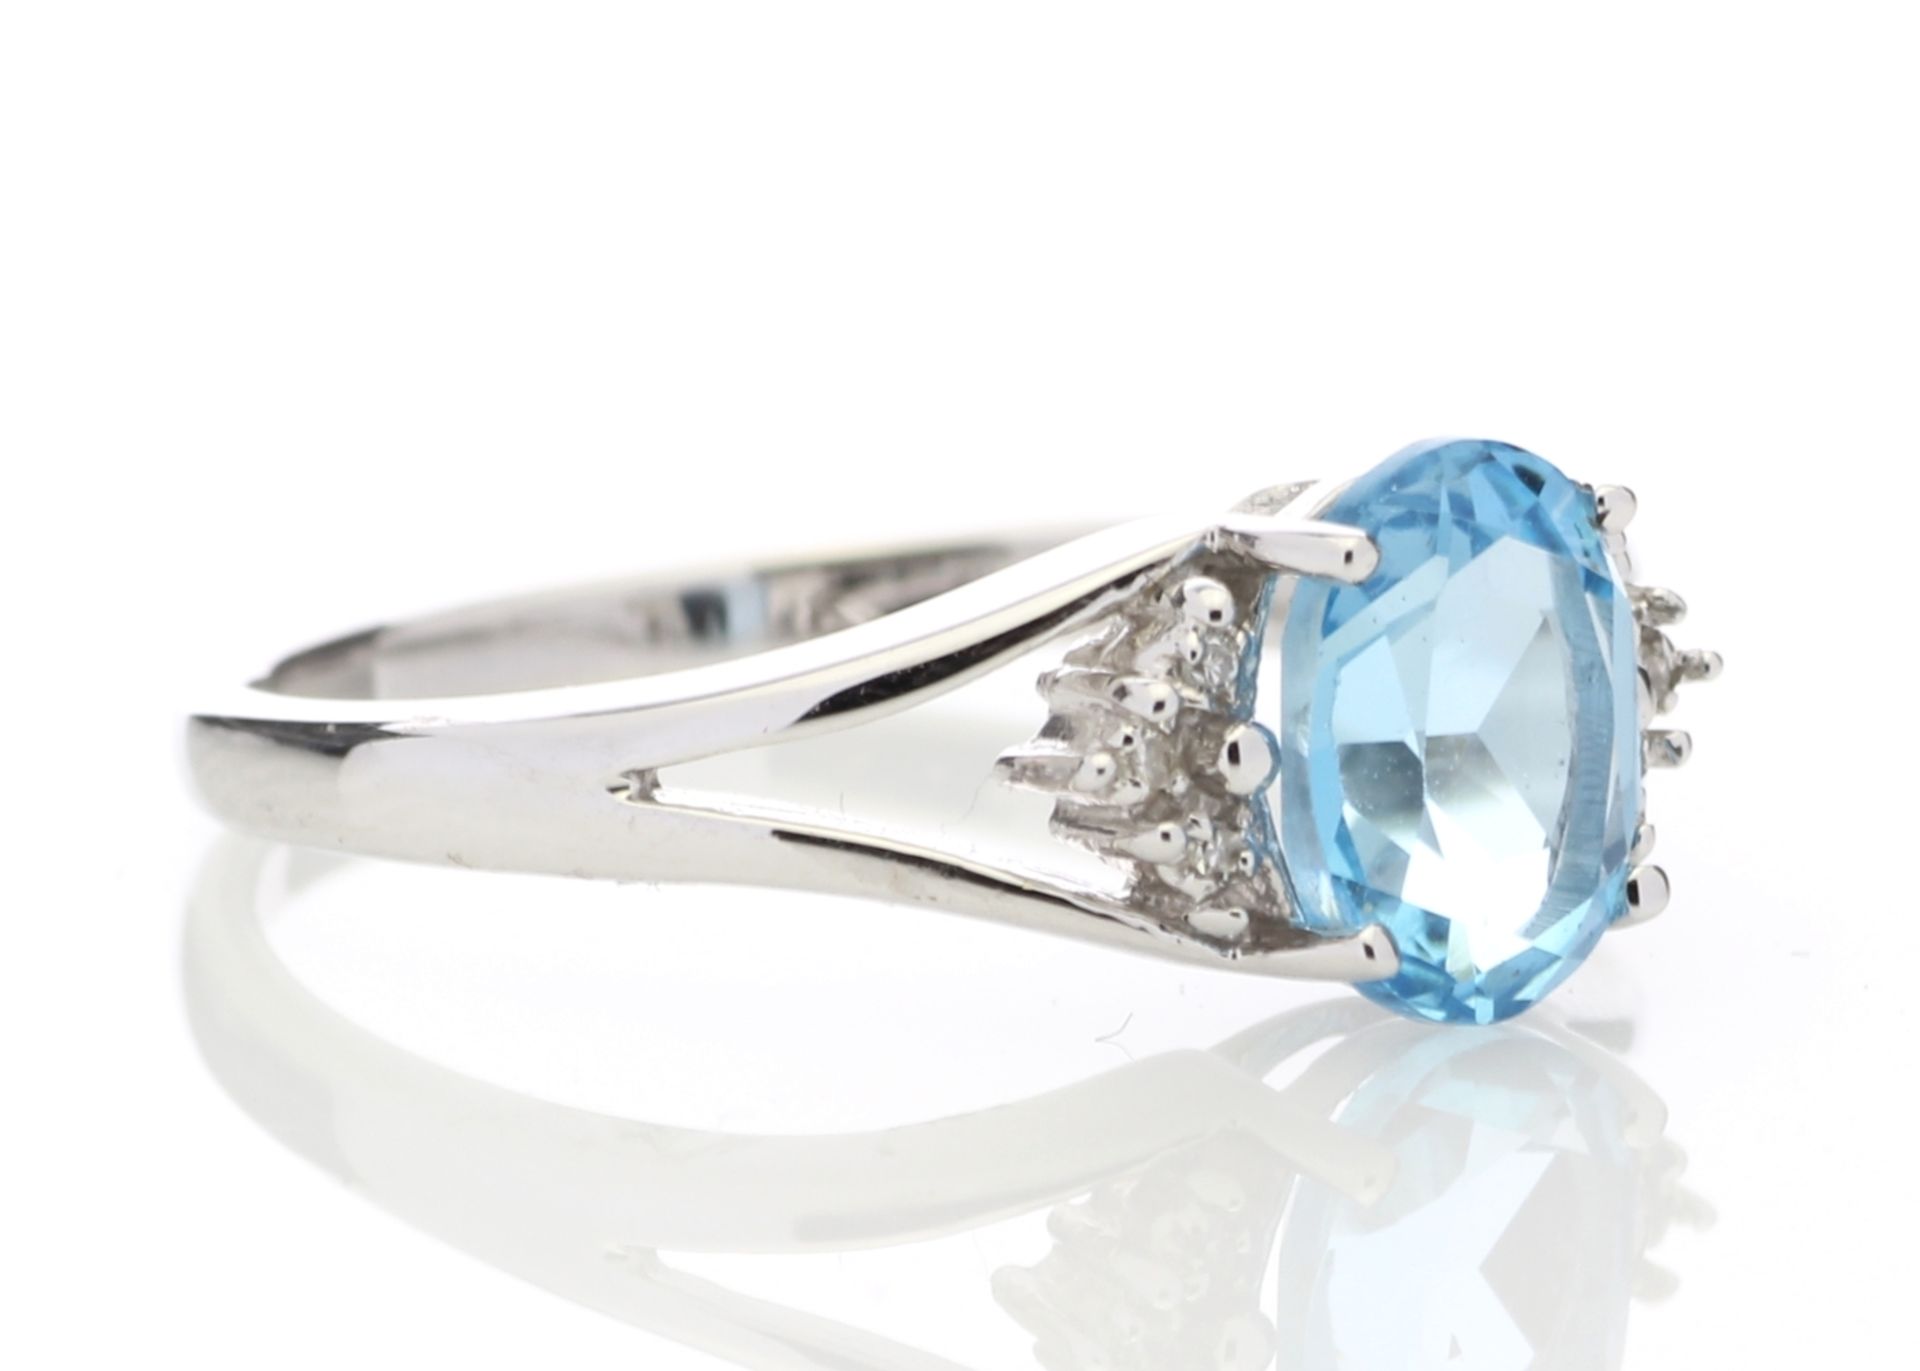 9ct White Gold Diamond And Blue Topaz Ring 0.02 - Image 4 of 6